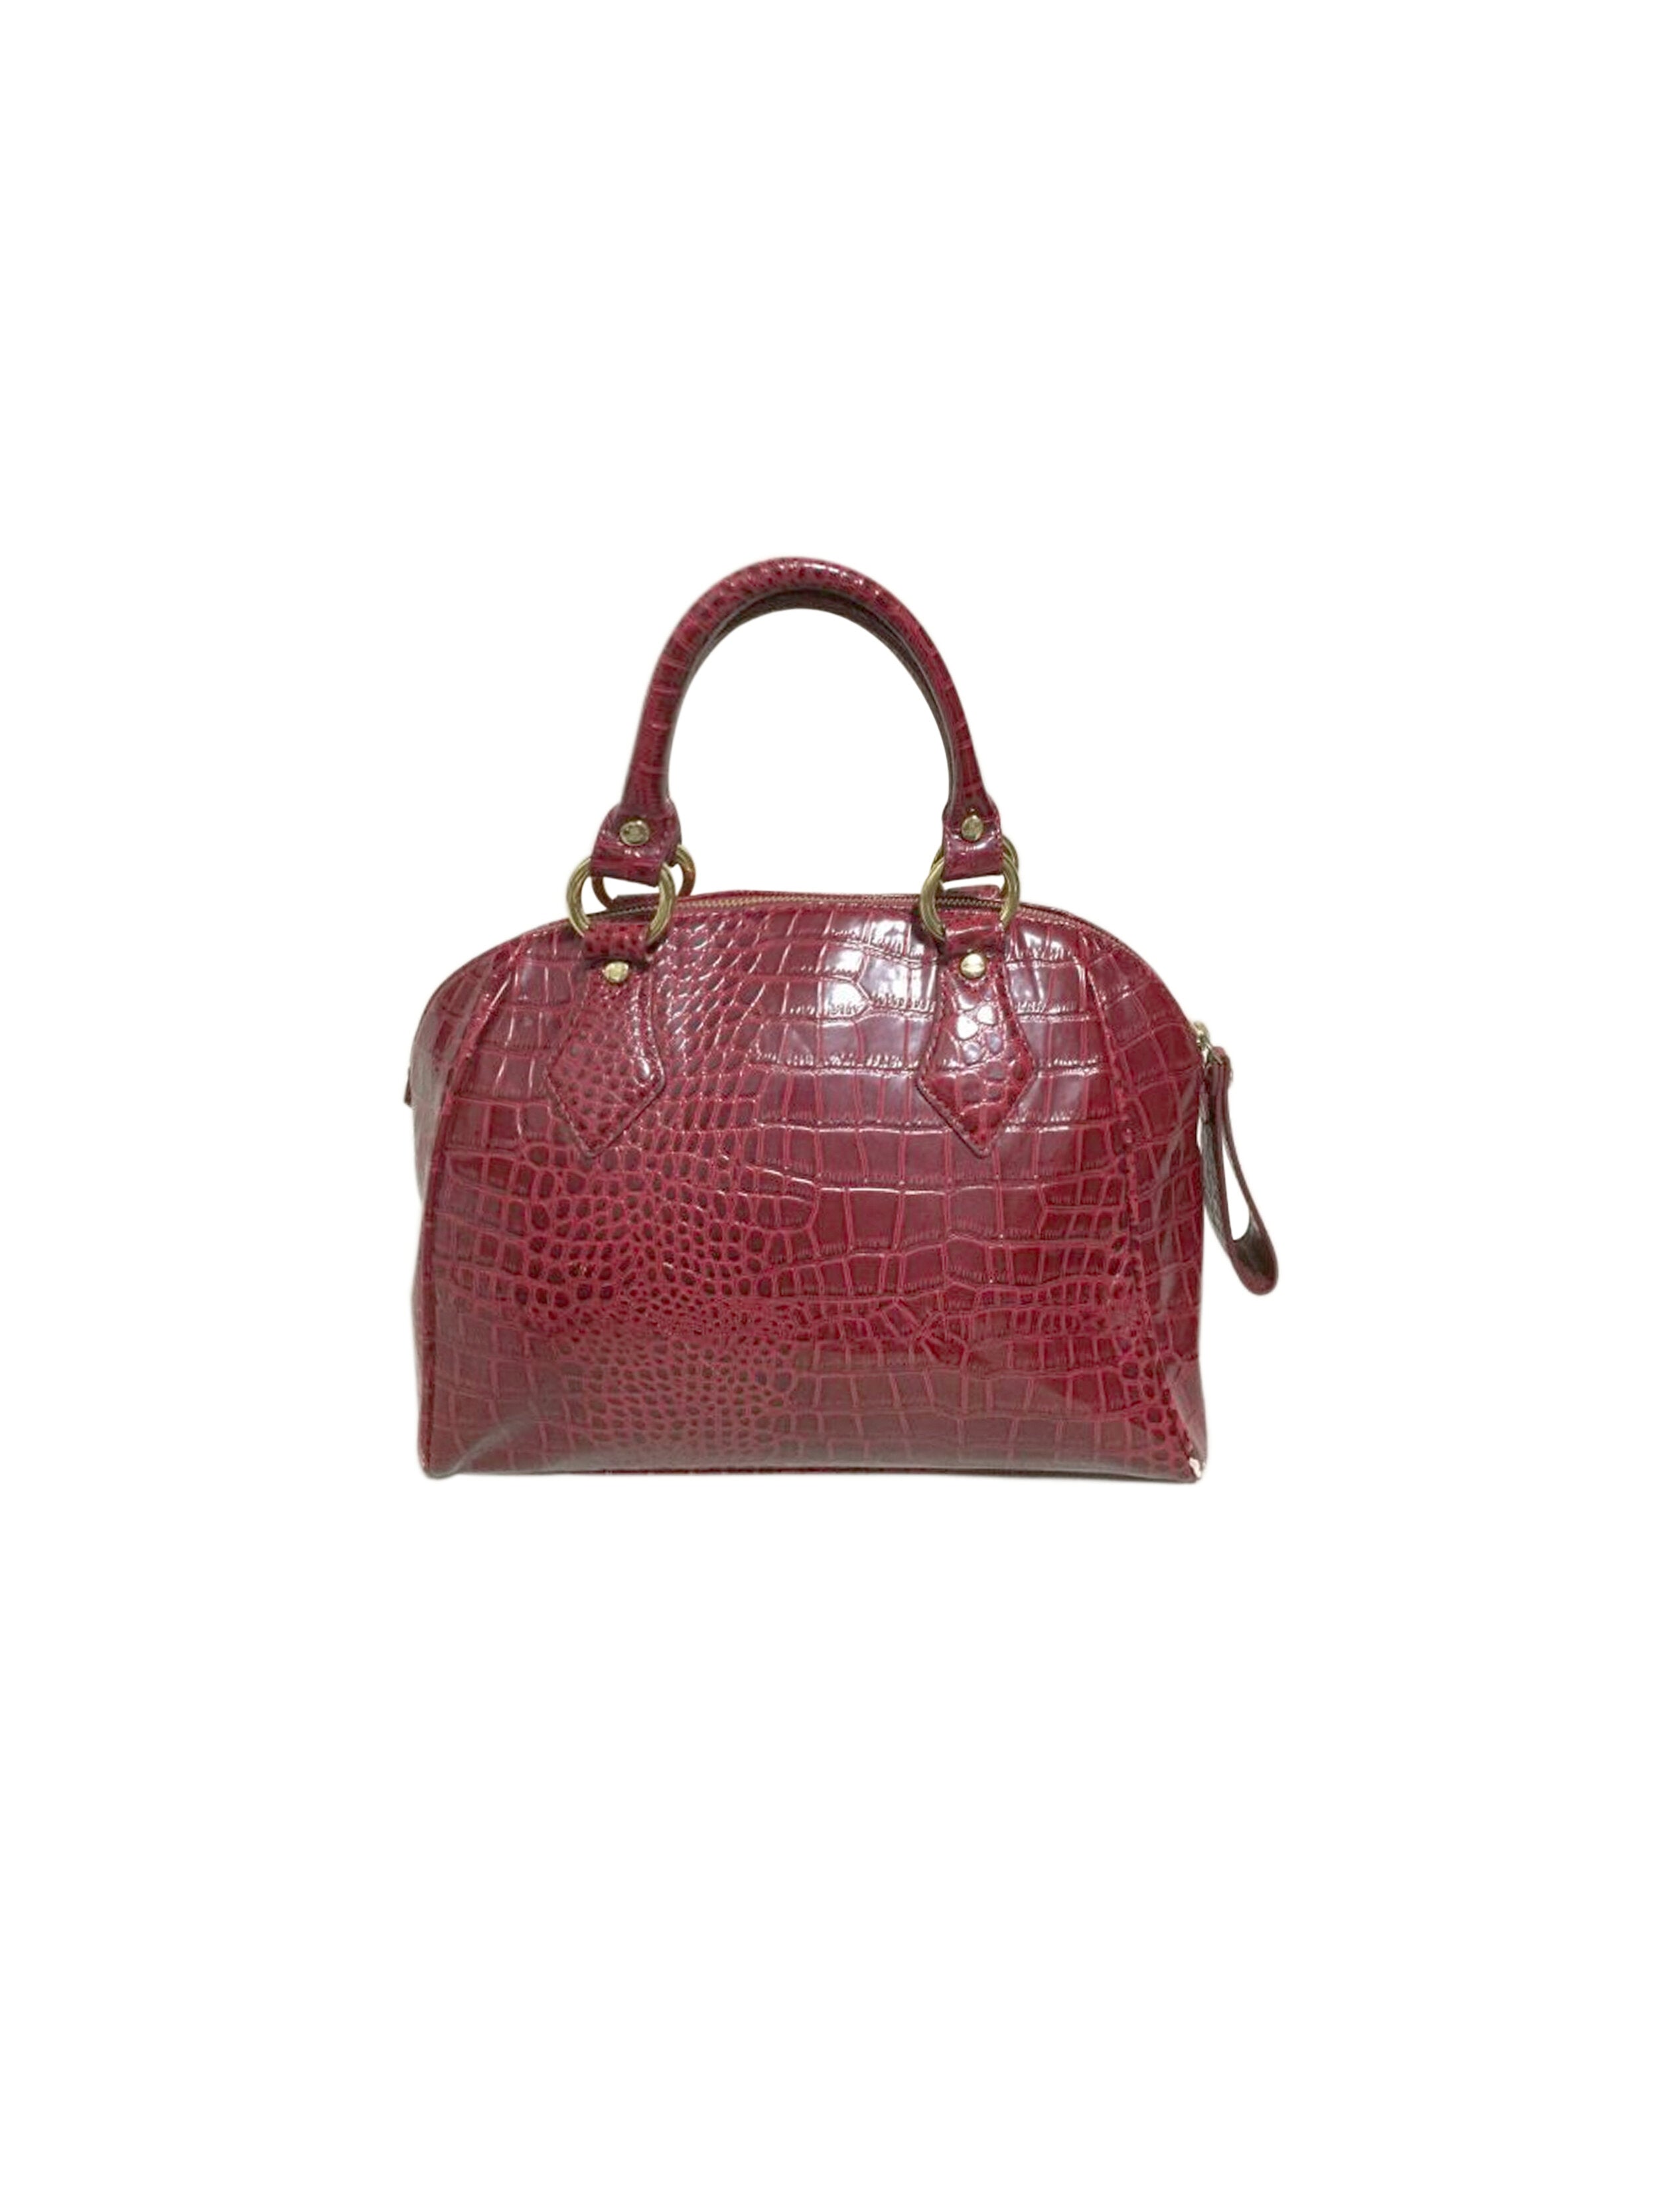 Chancery heart leather crossbody bag Vivienne Westwood Red in